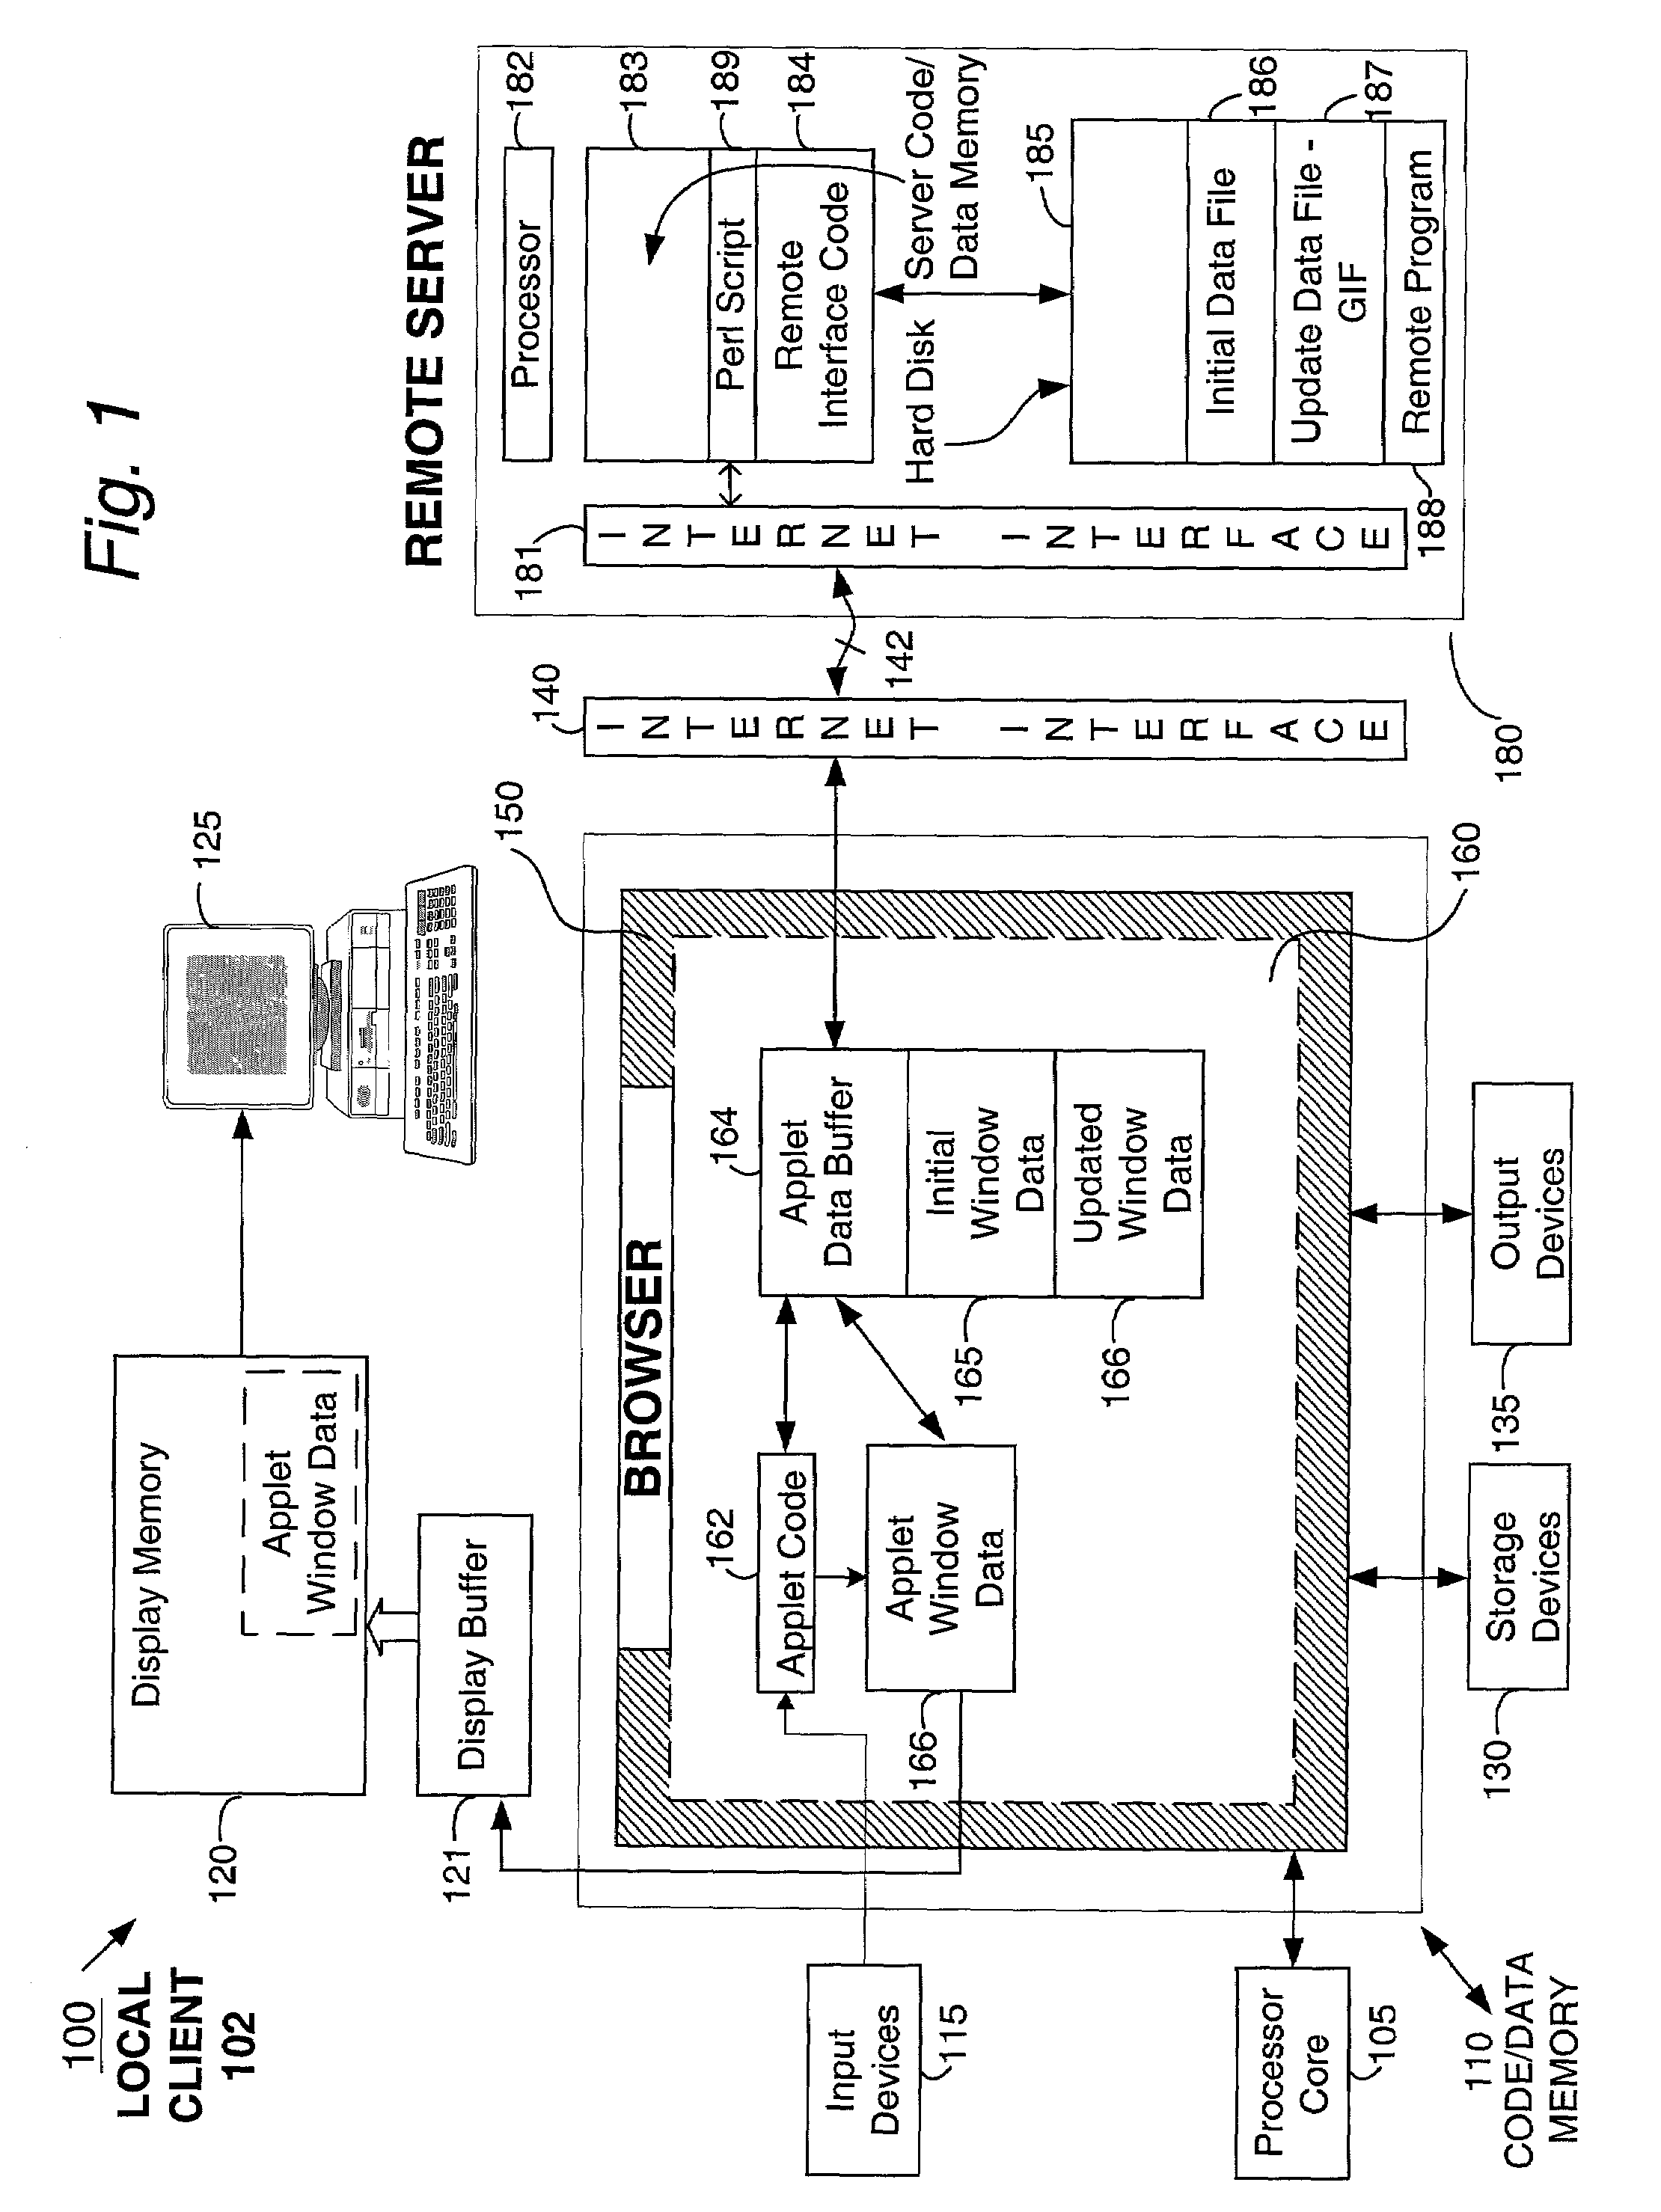 System and method for annotating and capturing chart data